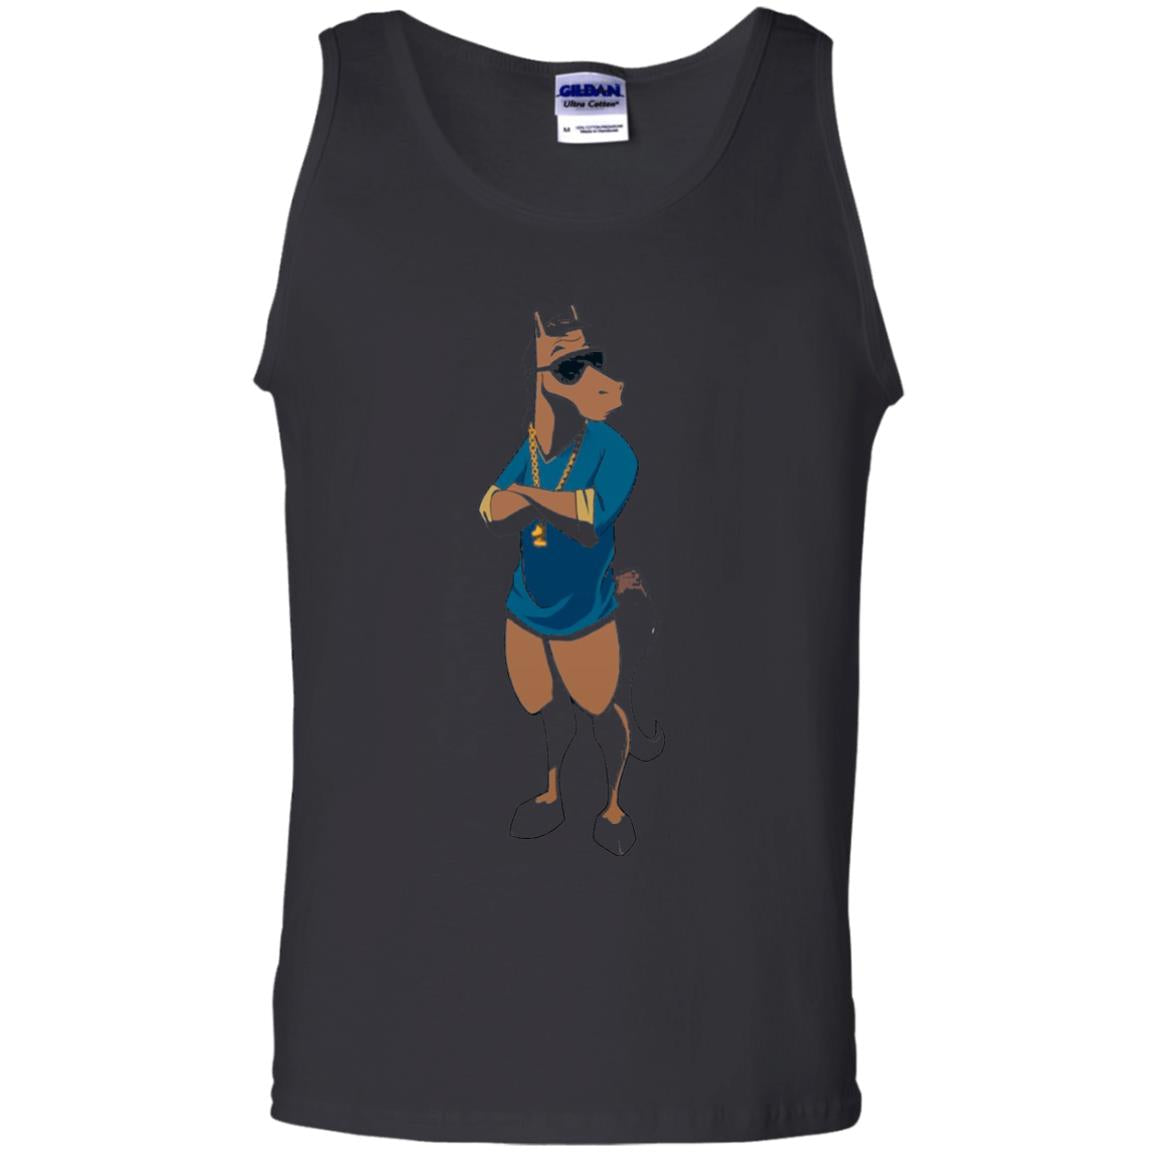 The Rapping Race Horse Hip-hop Horse Lover T-shirt